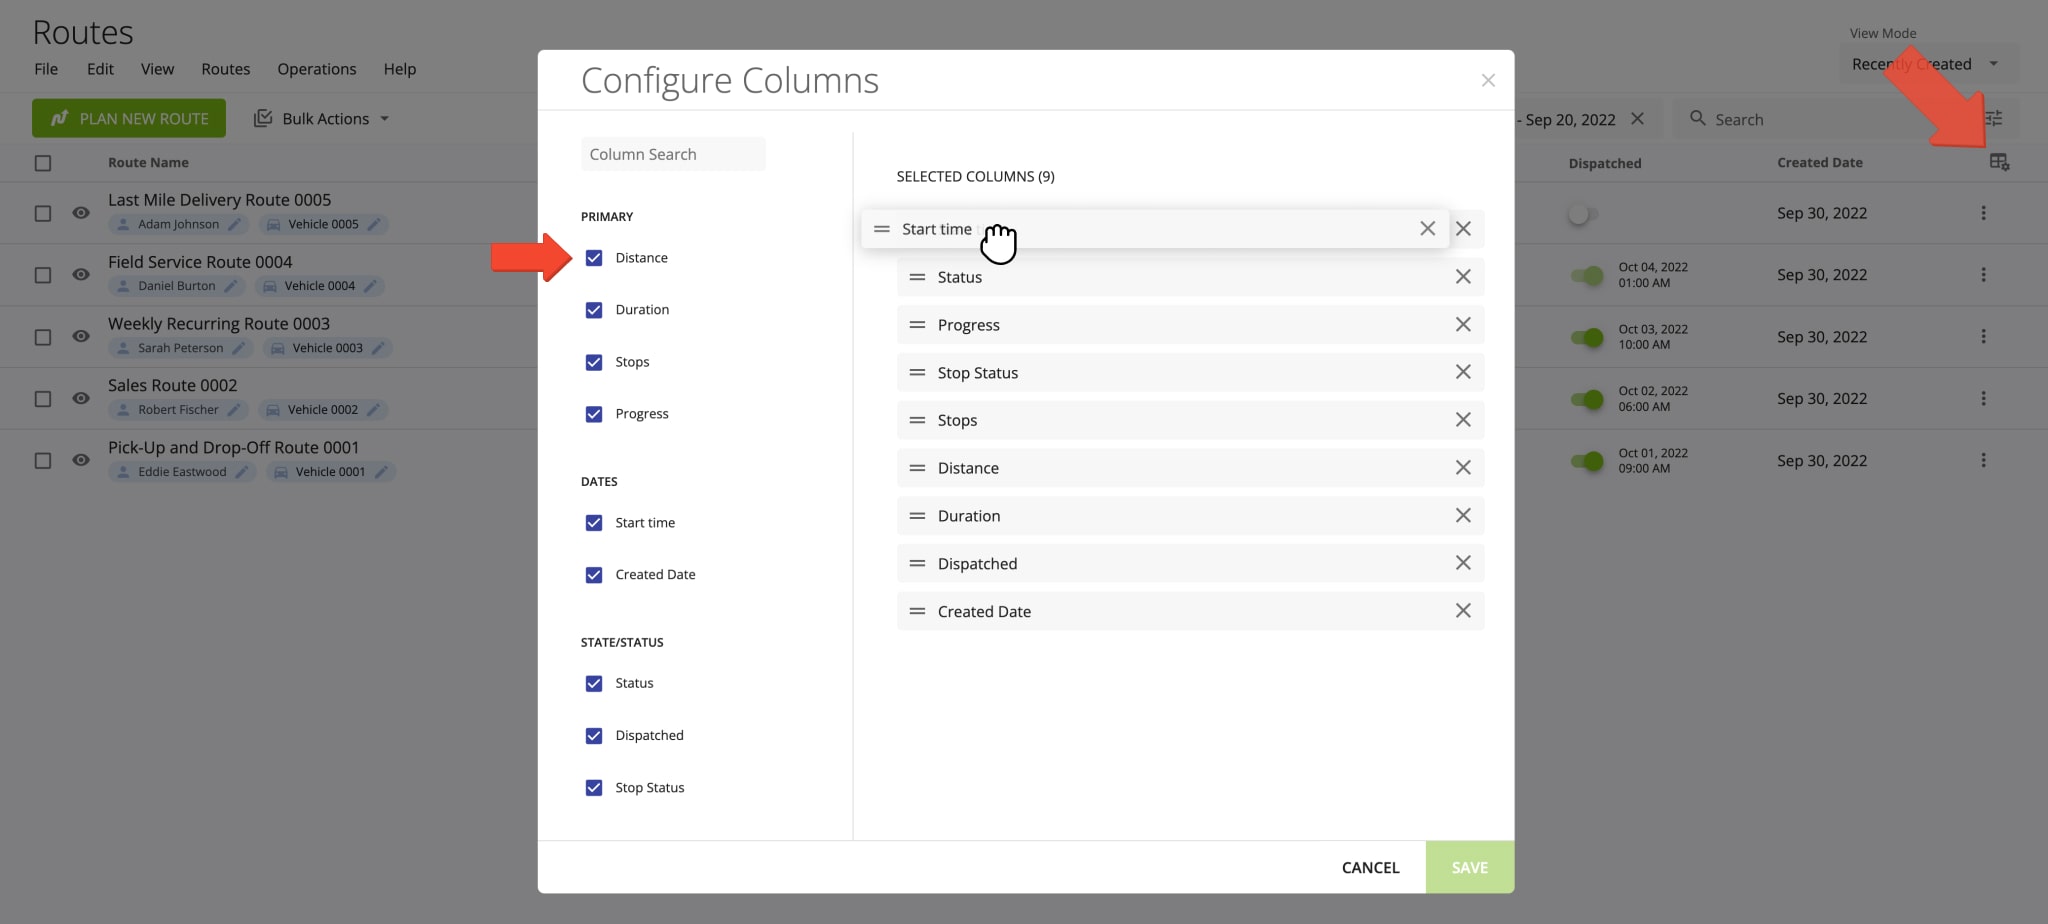 Configure route data columns and customize columns order in Route4Me Route Planner Routes List.